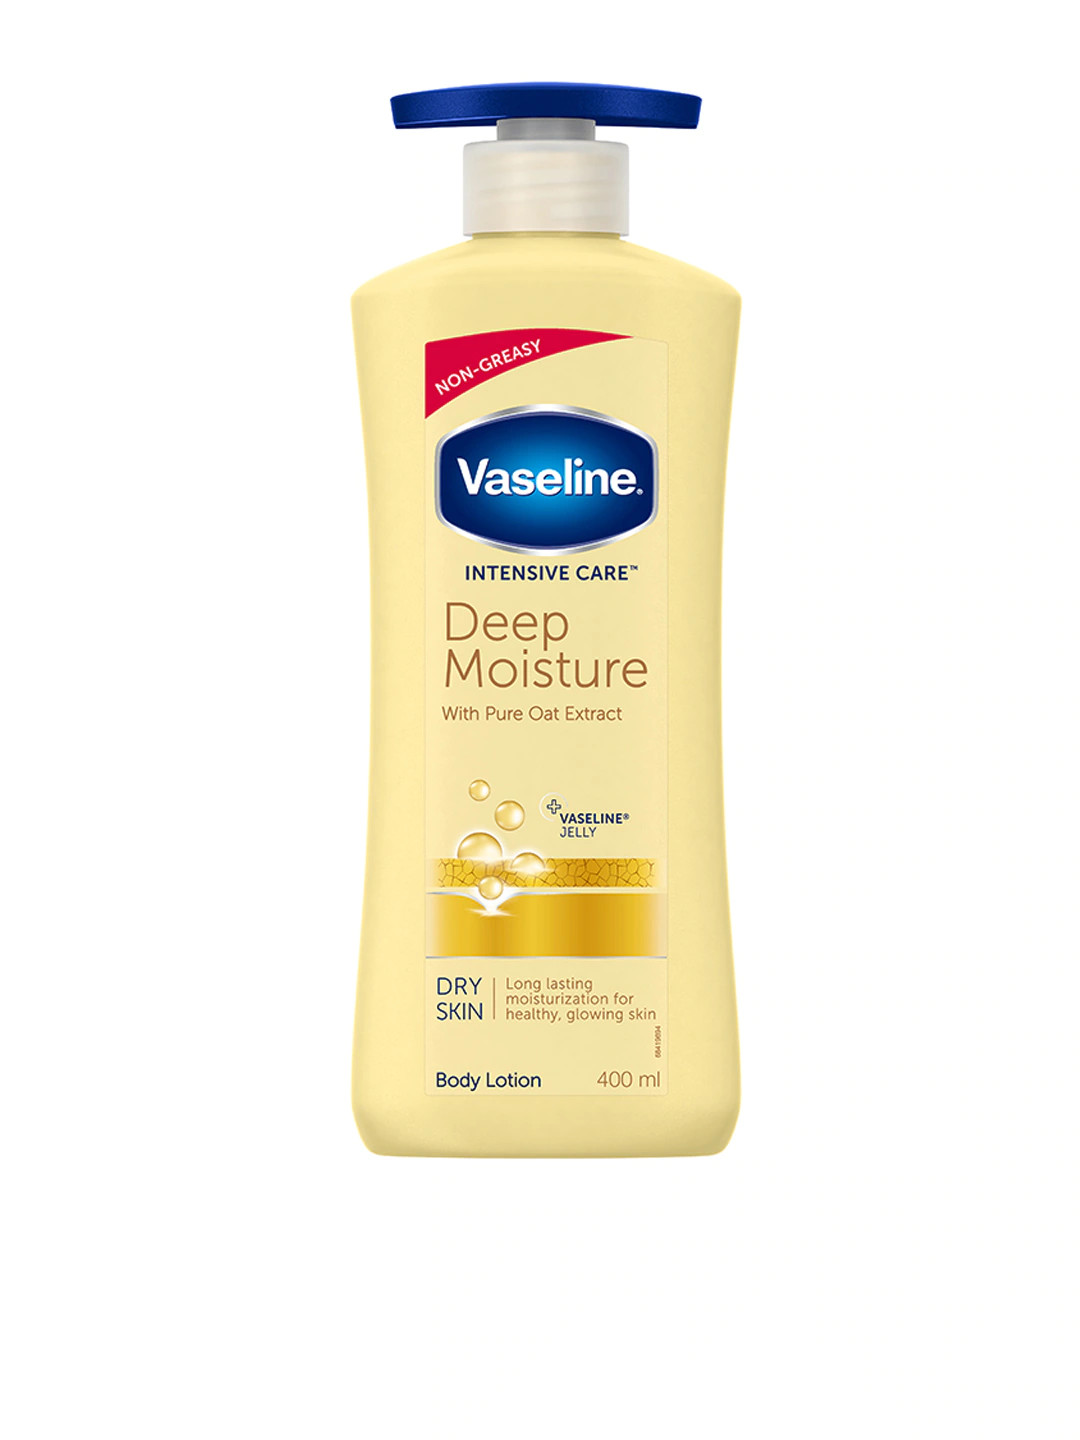 Buy Vaseline Intensive Care Deep Moisture Body Lotion with Pure Oat Extract for Dry Skin 400ml